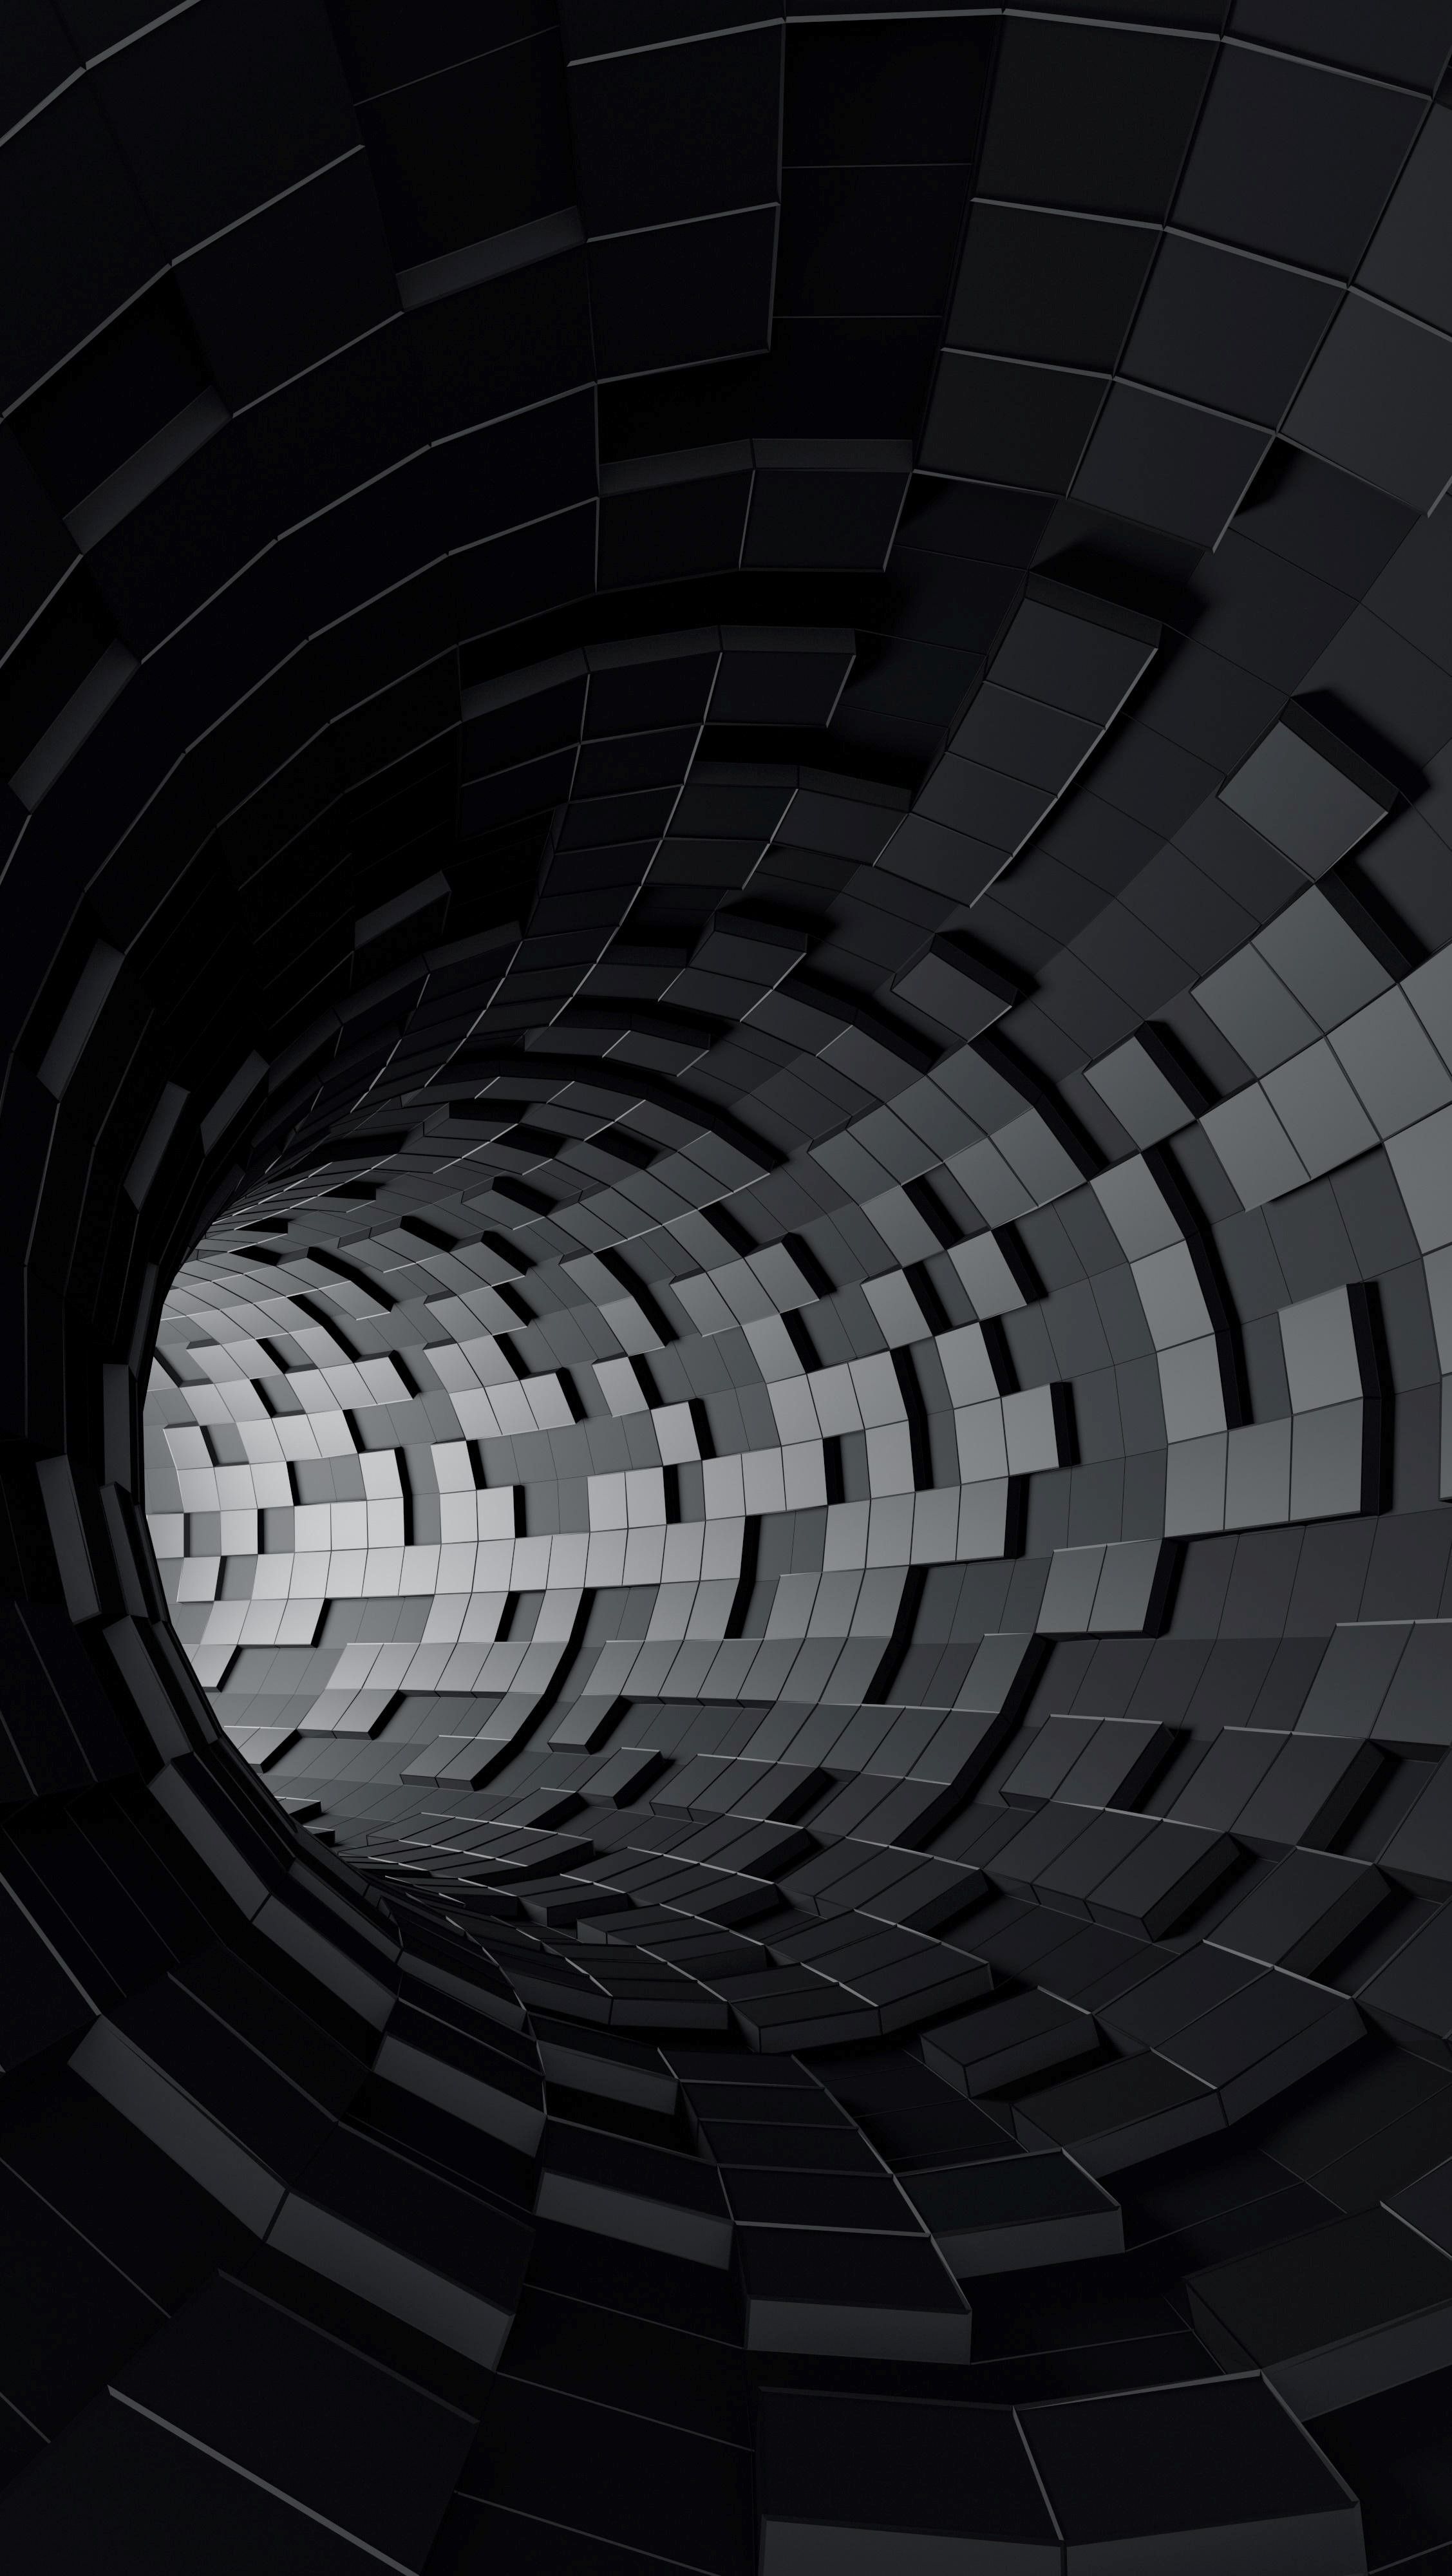 A black and white tunnel with many squares - 3D